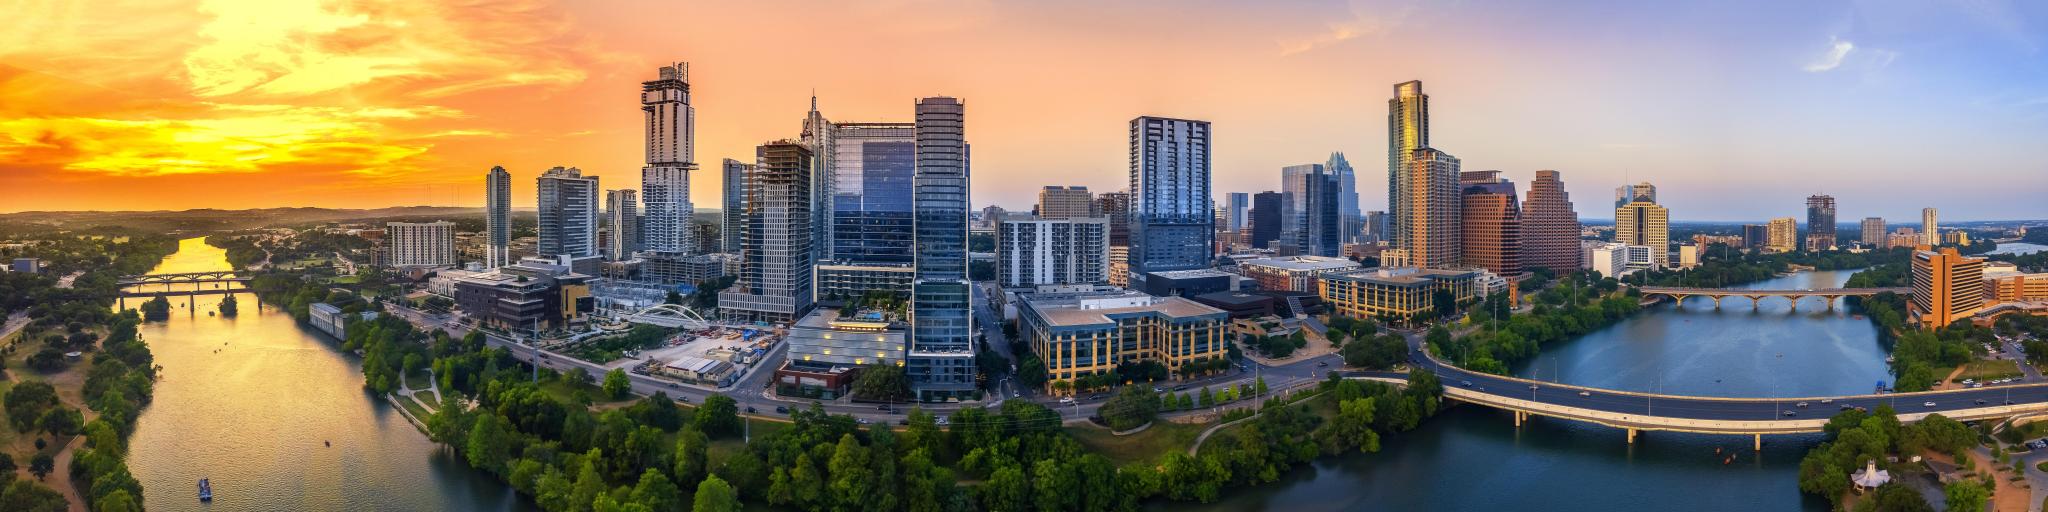 Austin, Texas, USA with the city skyline in the evening and blue hour taken as a panoramic shot.